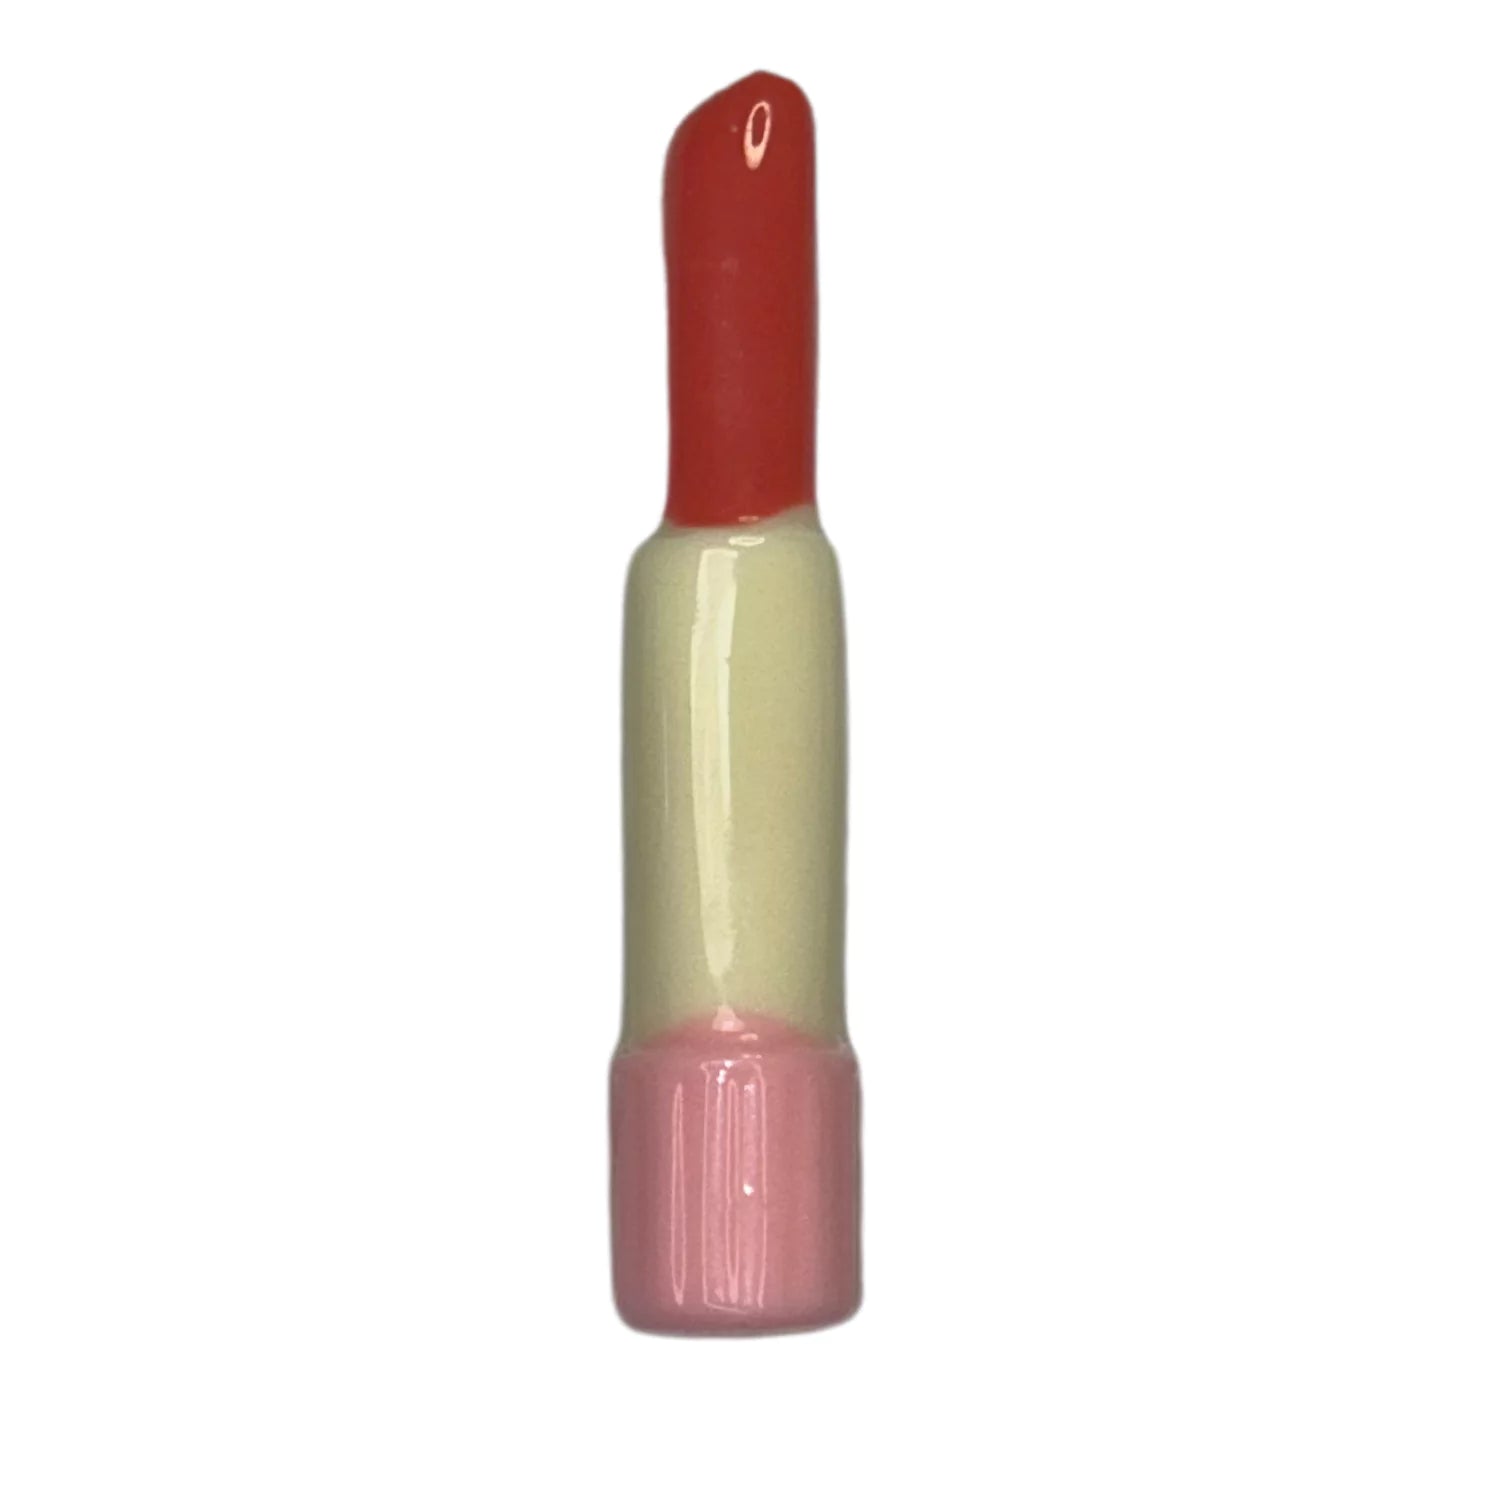 Assorted Colors Lipstick White and Chocolate Milk Chocolate 0.4 oz each Candy Red White Chocolate